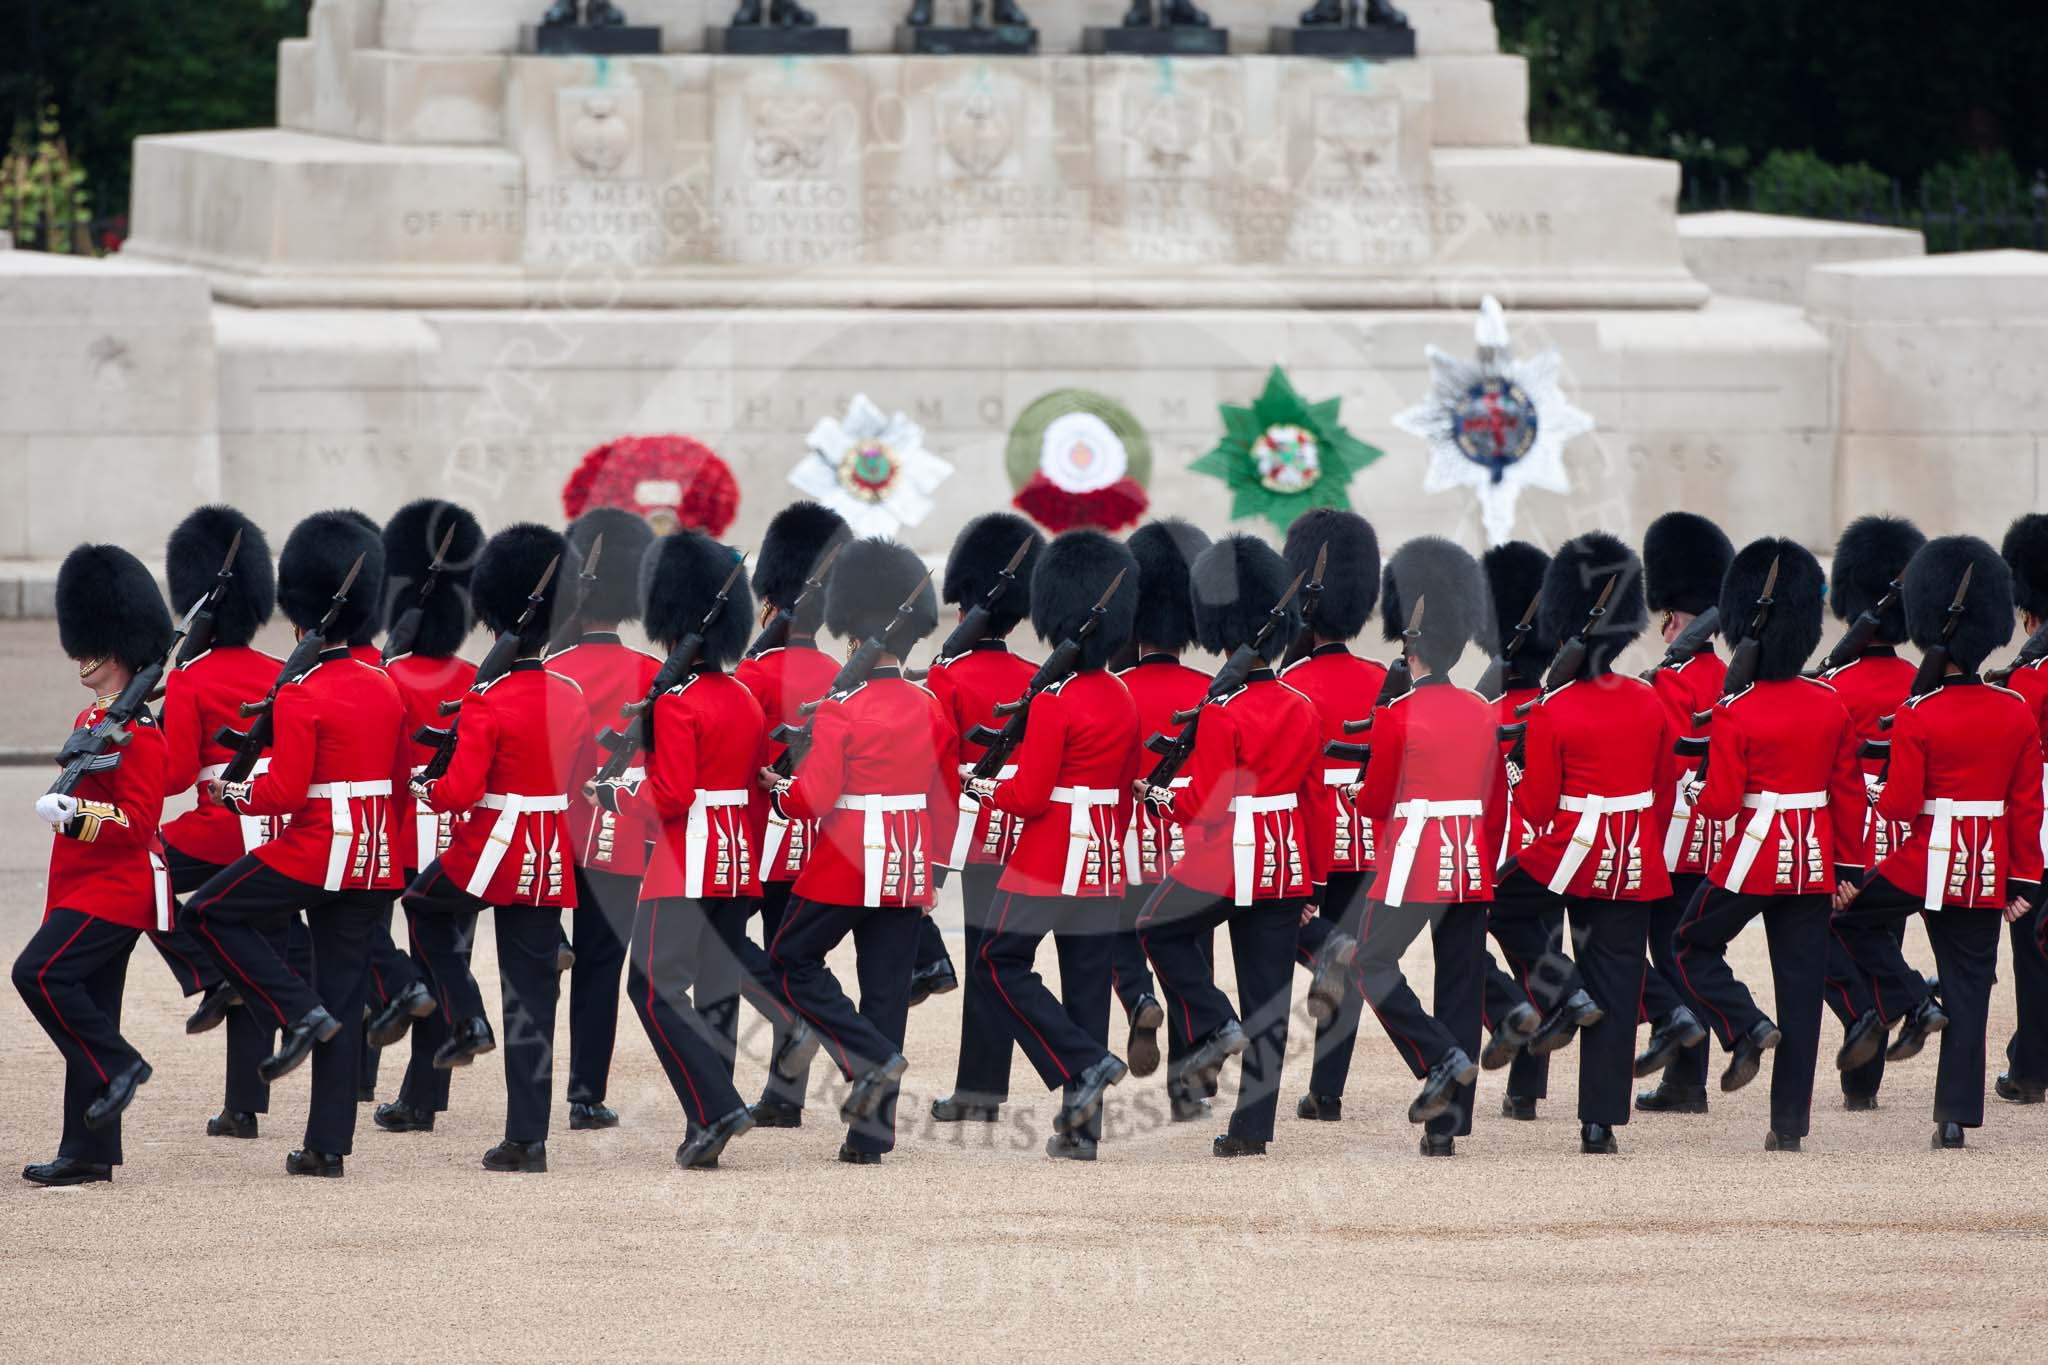 Trooping the Colour 2009: No. 3 Guard, 1st Battalion Irish Guards, changing direction for the arrival of the Royal Procession. Behind them the Guards Memorial..
Horse Guards Parade, Westminster,
London SW1,

United Kingdom,
on 13 June 2009 at 10:42, image #81